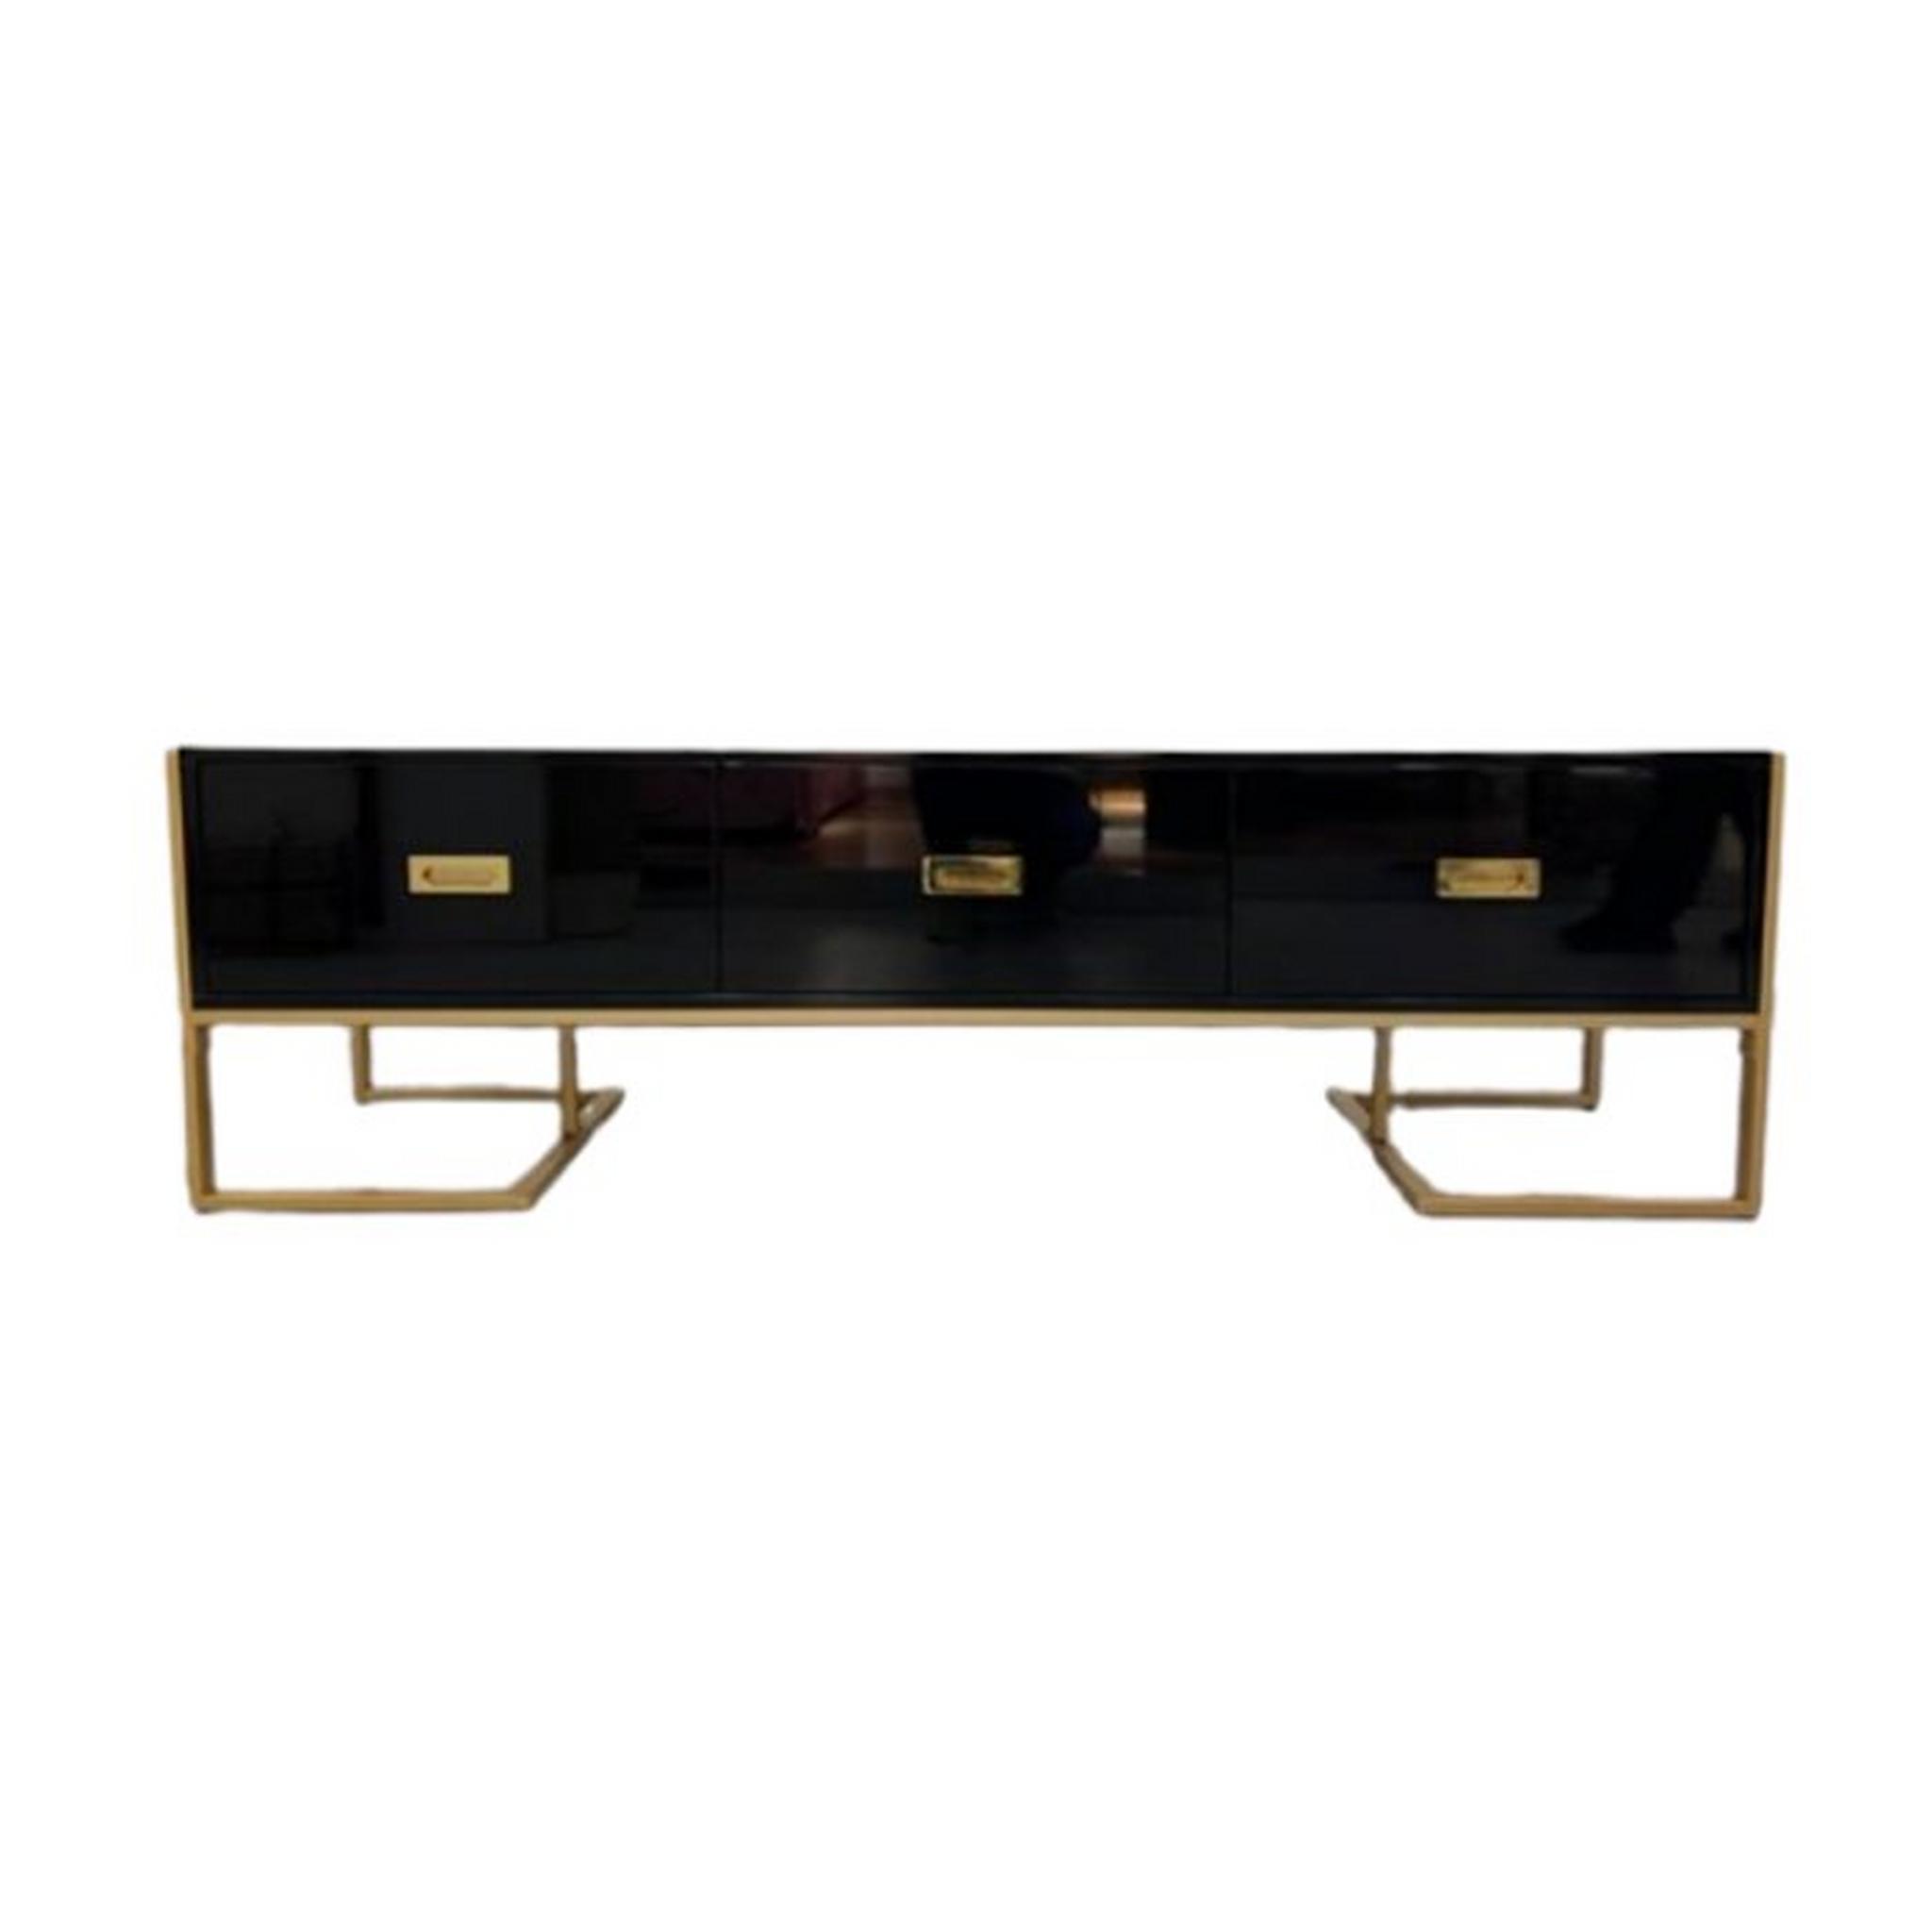 Wansa TV Stand up to 75 inches, 75 Kg, KS0221